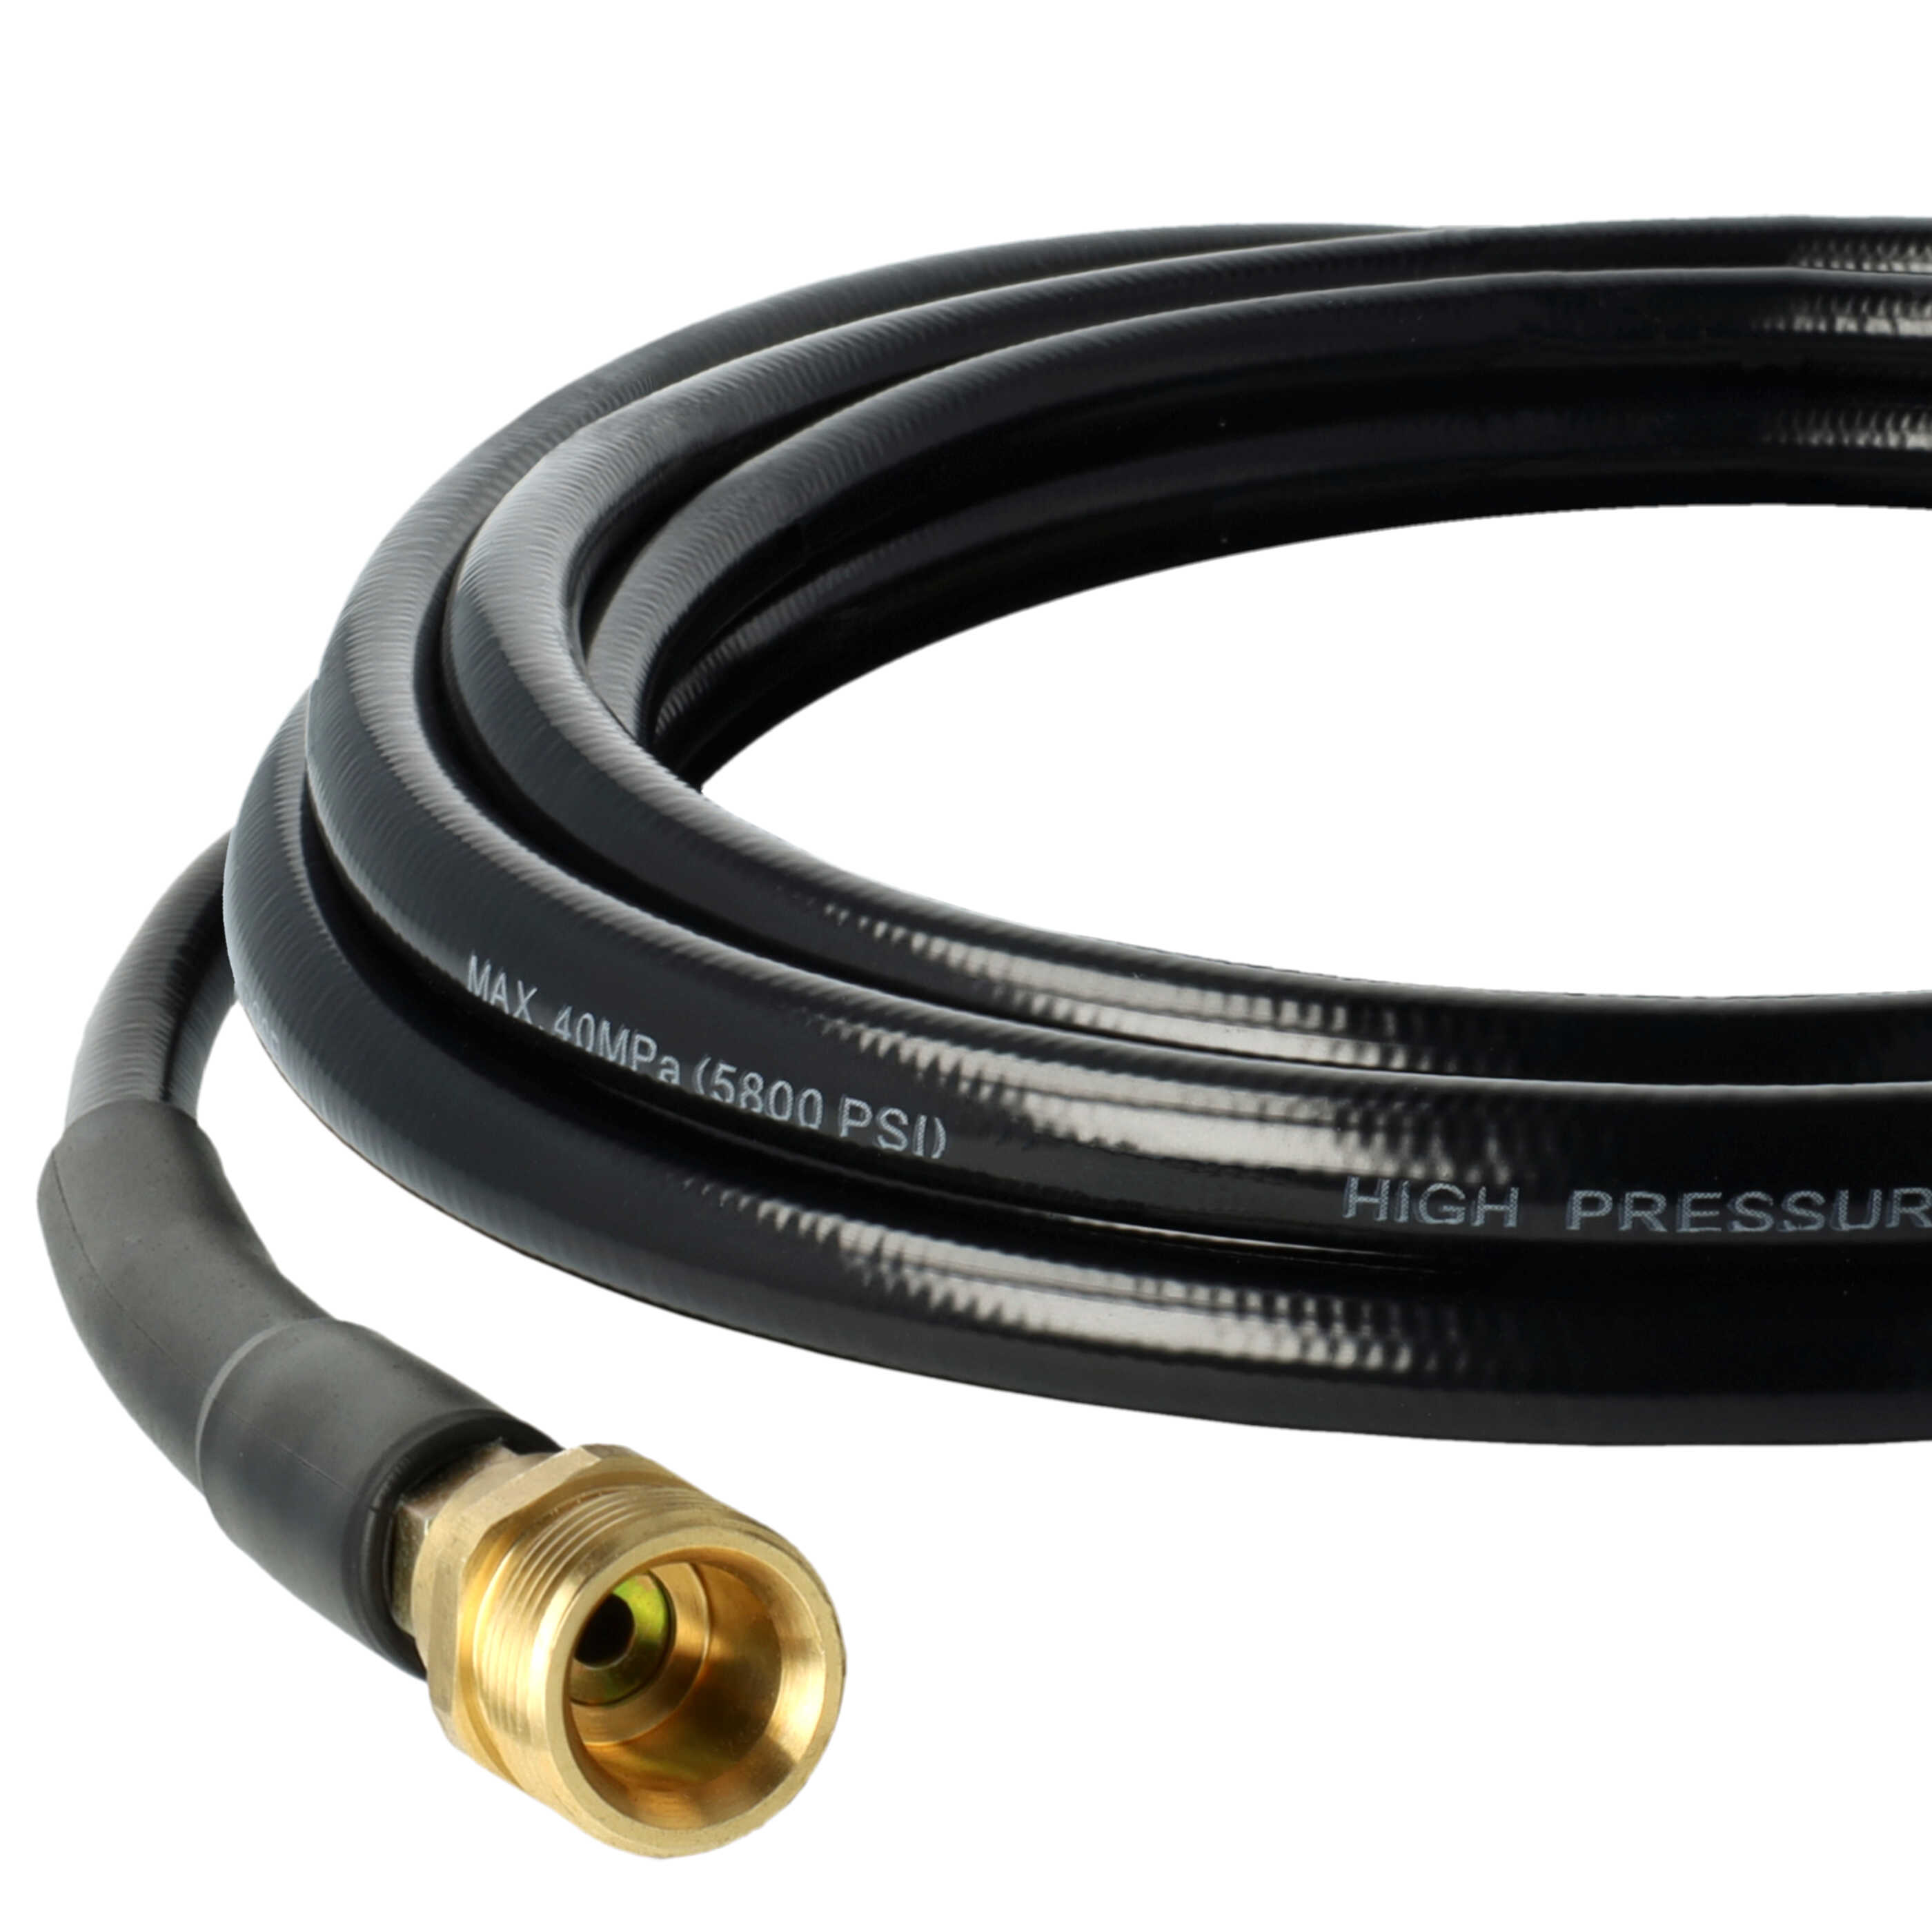 vhbw 5 m Extension Hose High-Pressure Cleaner with M22 x 1.5 Threaded Connection Black